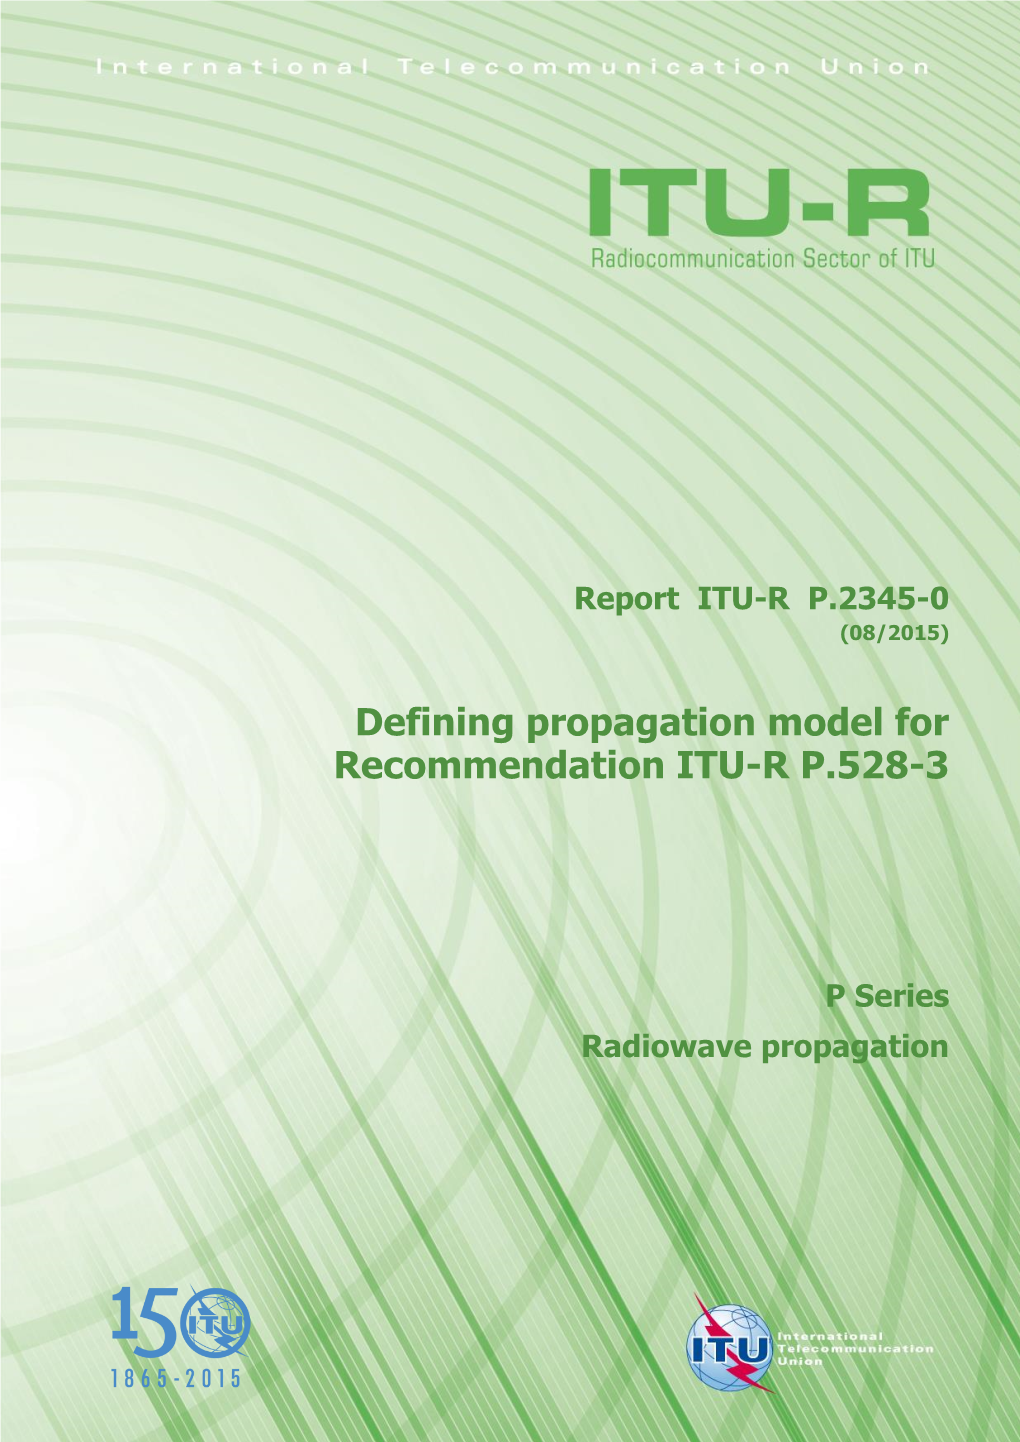 Defining Propagation Model for Recommendation ITU-R P.528-3